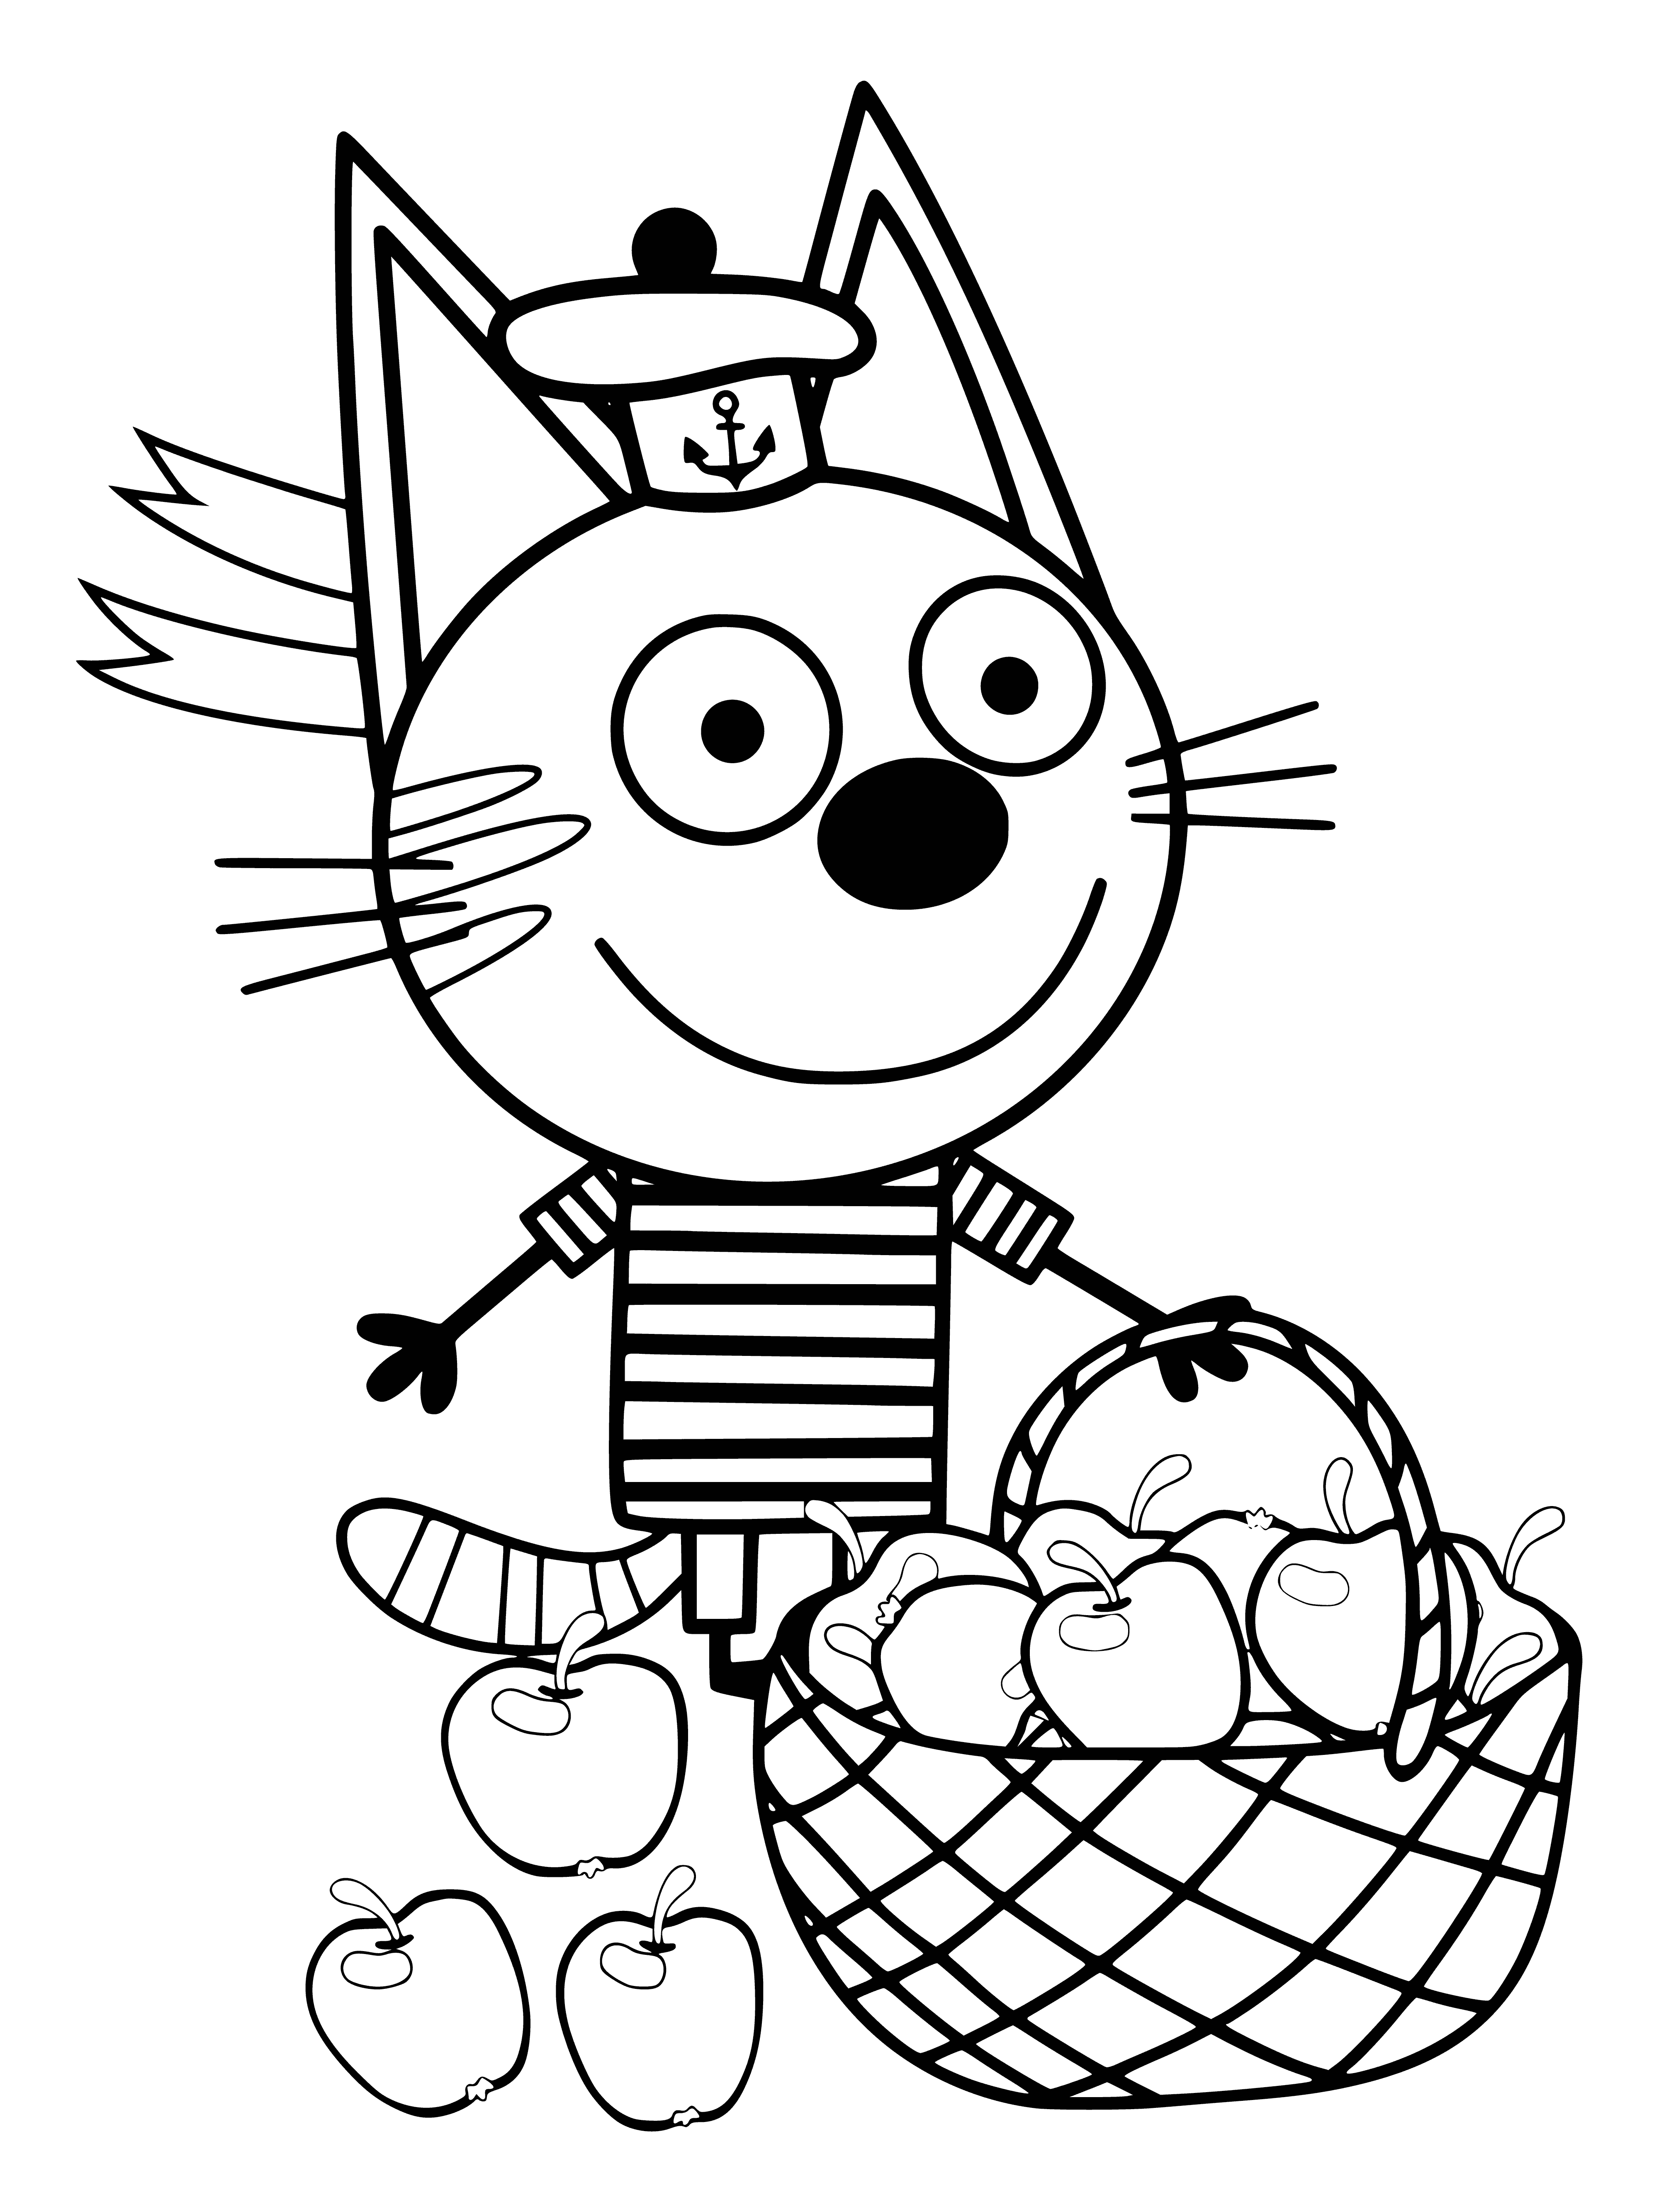 coloring page: 3 cats: tortoiseshell, black, white; all looking at a plate of apples - tortoiseshell & white on the table, black on the floor. #coloringpage